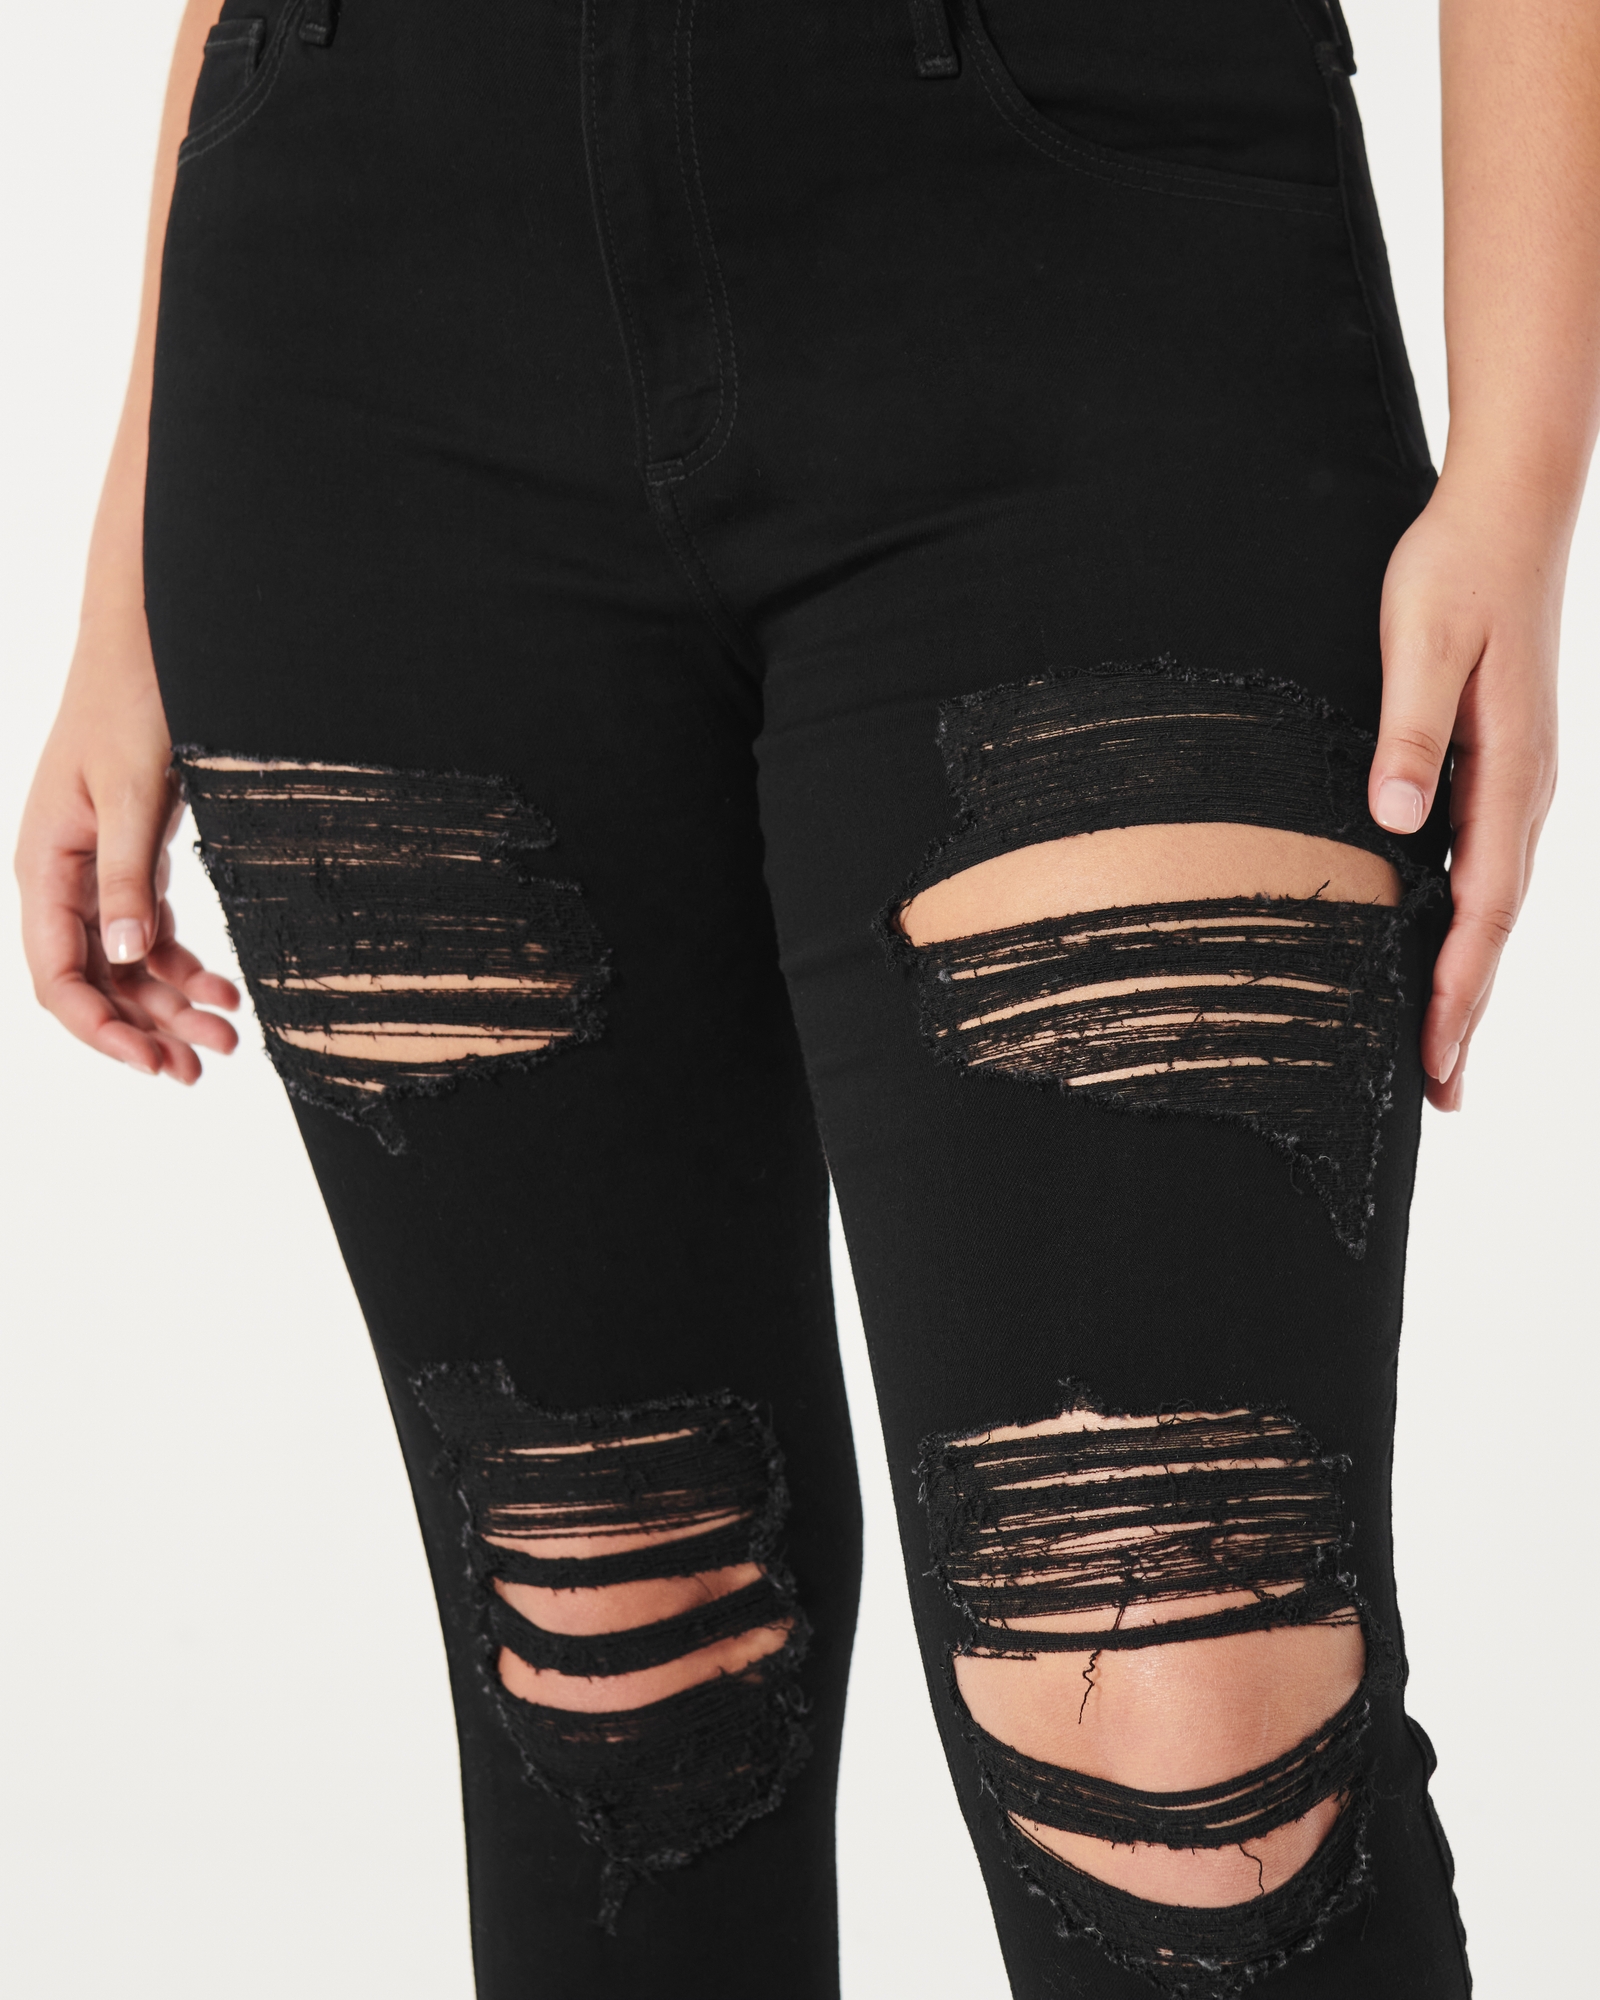 Women's Black Solid Ripped Jeans